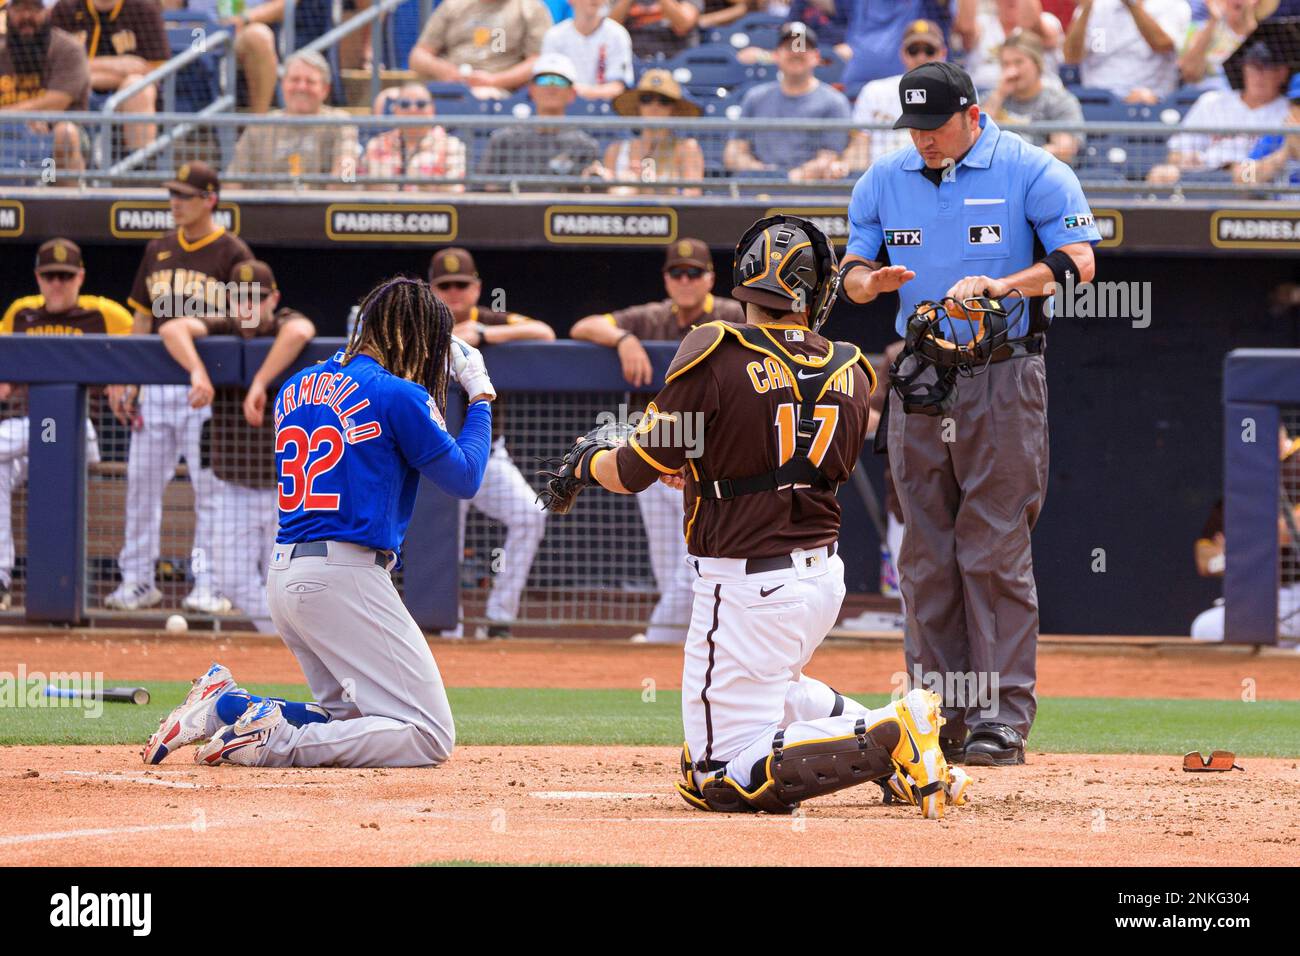 PEORIA, AZ - MARCH 26: Chicago Cubs outfielder Michael Hermosillo (32)  slides into home plate during the MLB Spring Training baseball game between  the Chicago Cubs and the San Diego Padres on